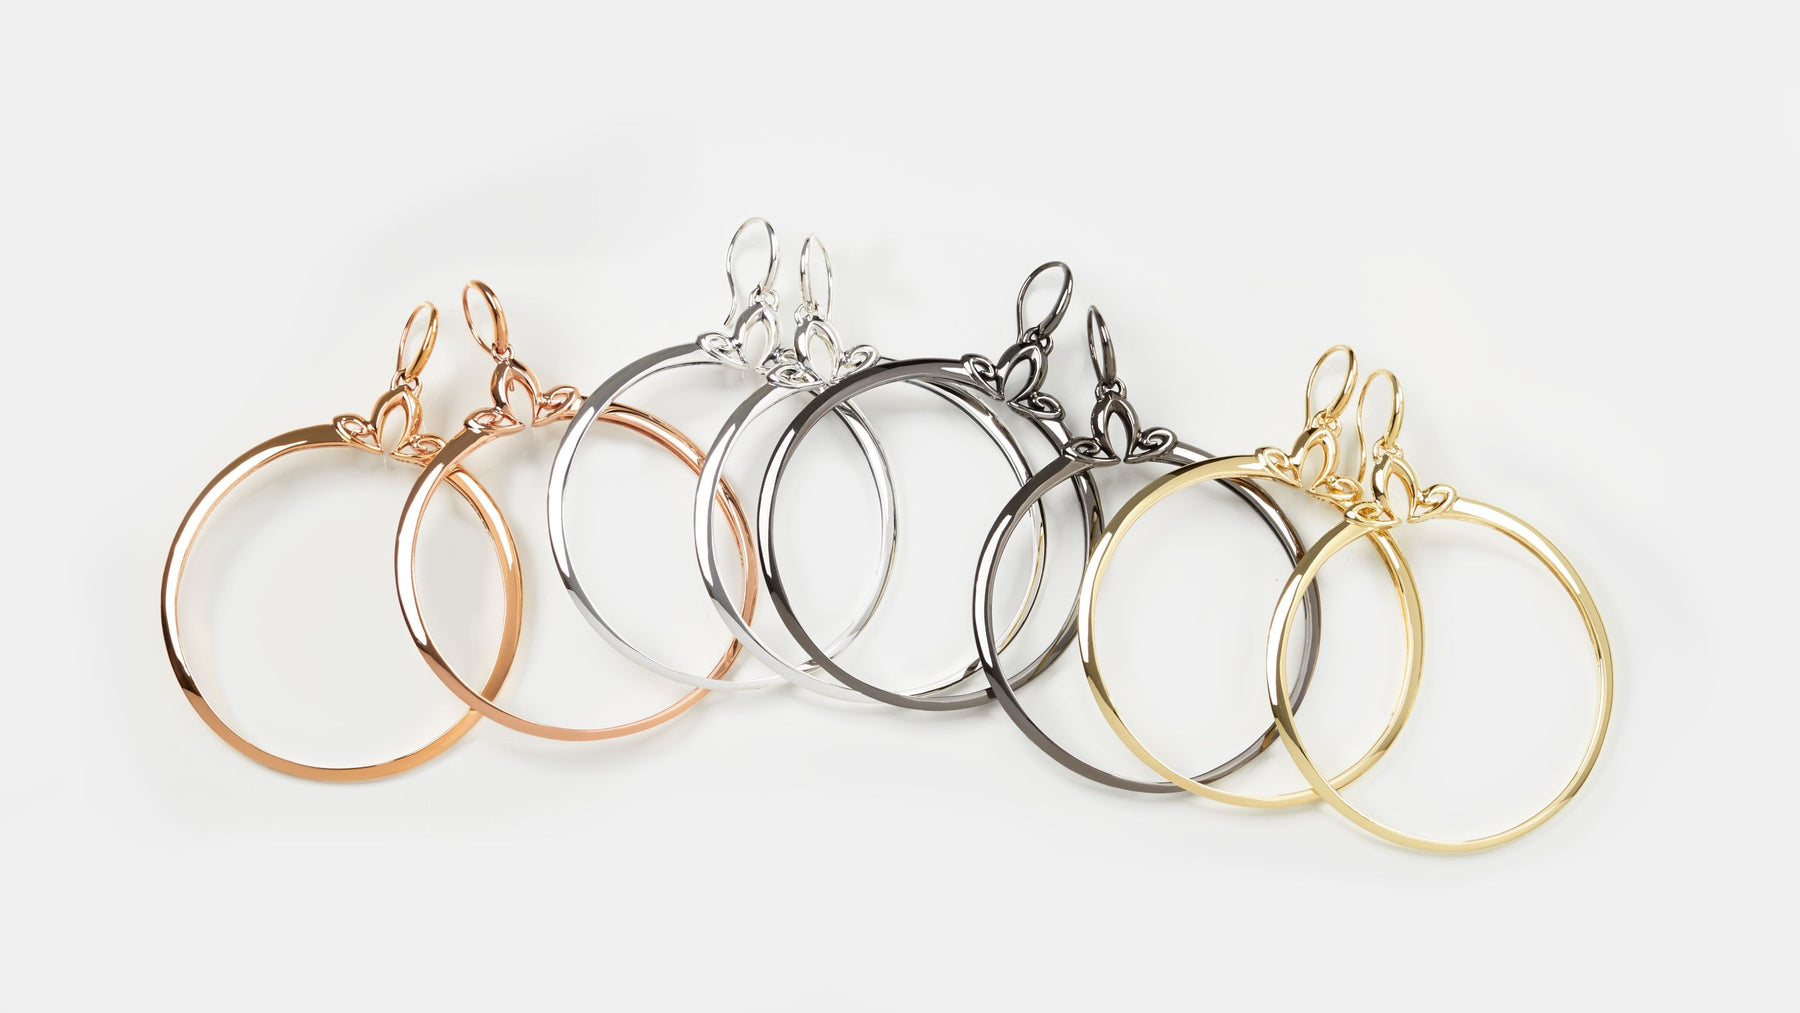 array of large portrait hoop earrings in rose gold, sterling silver, black ruthenium and gold